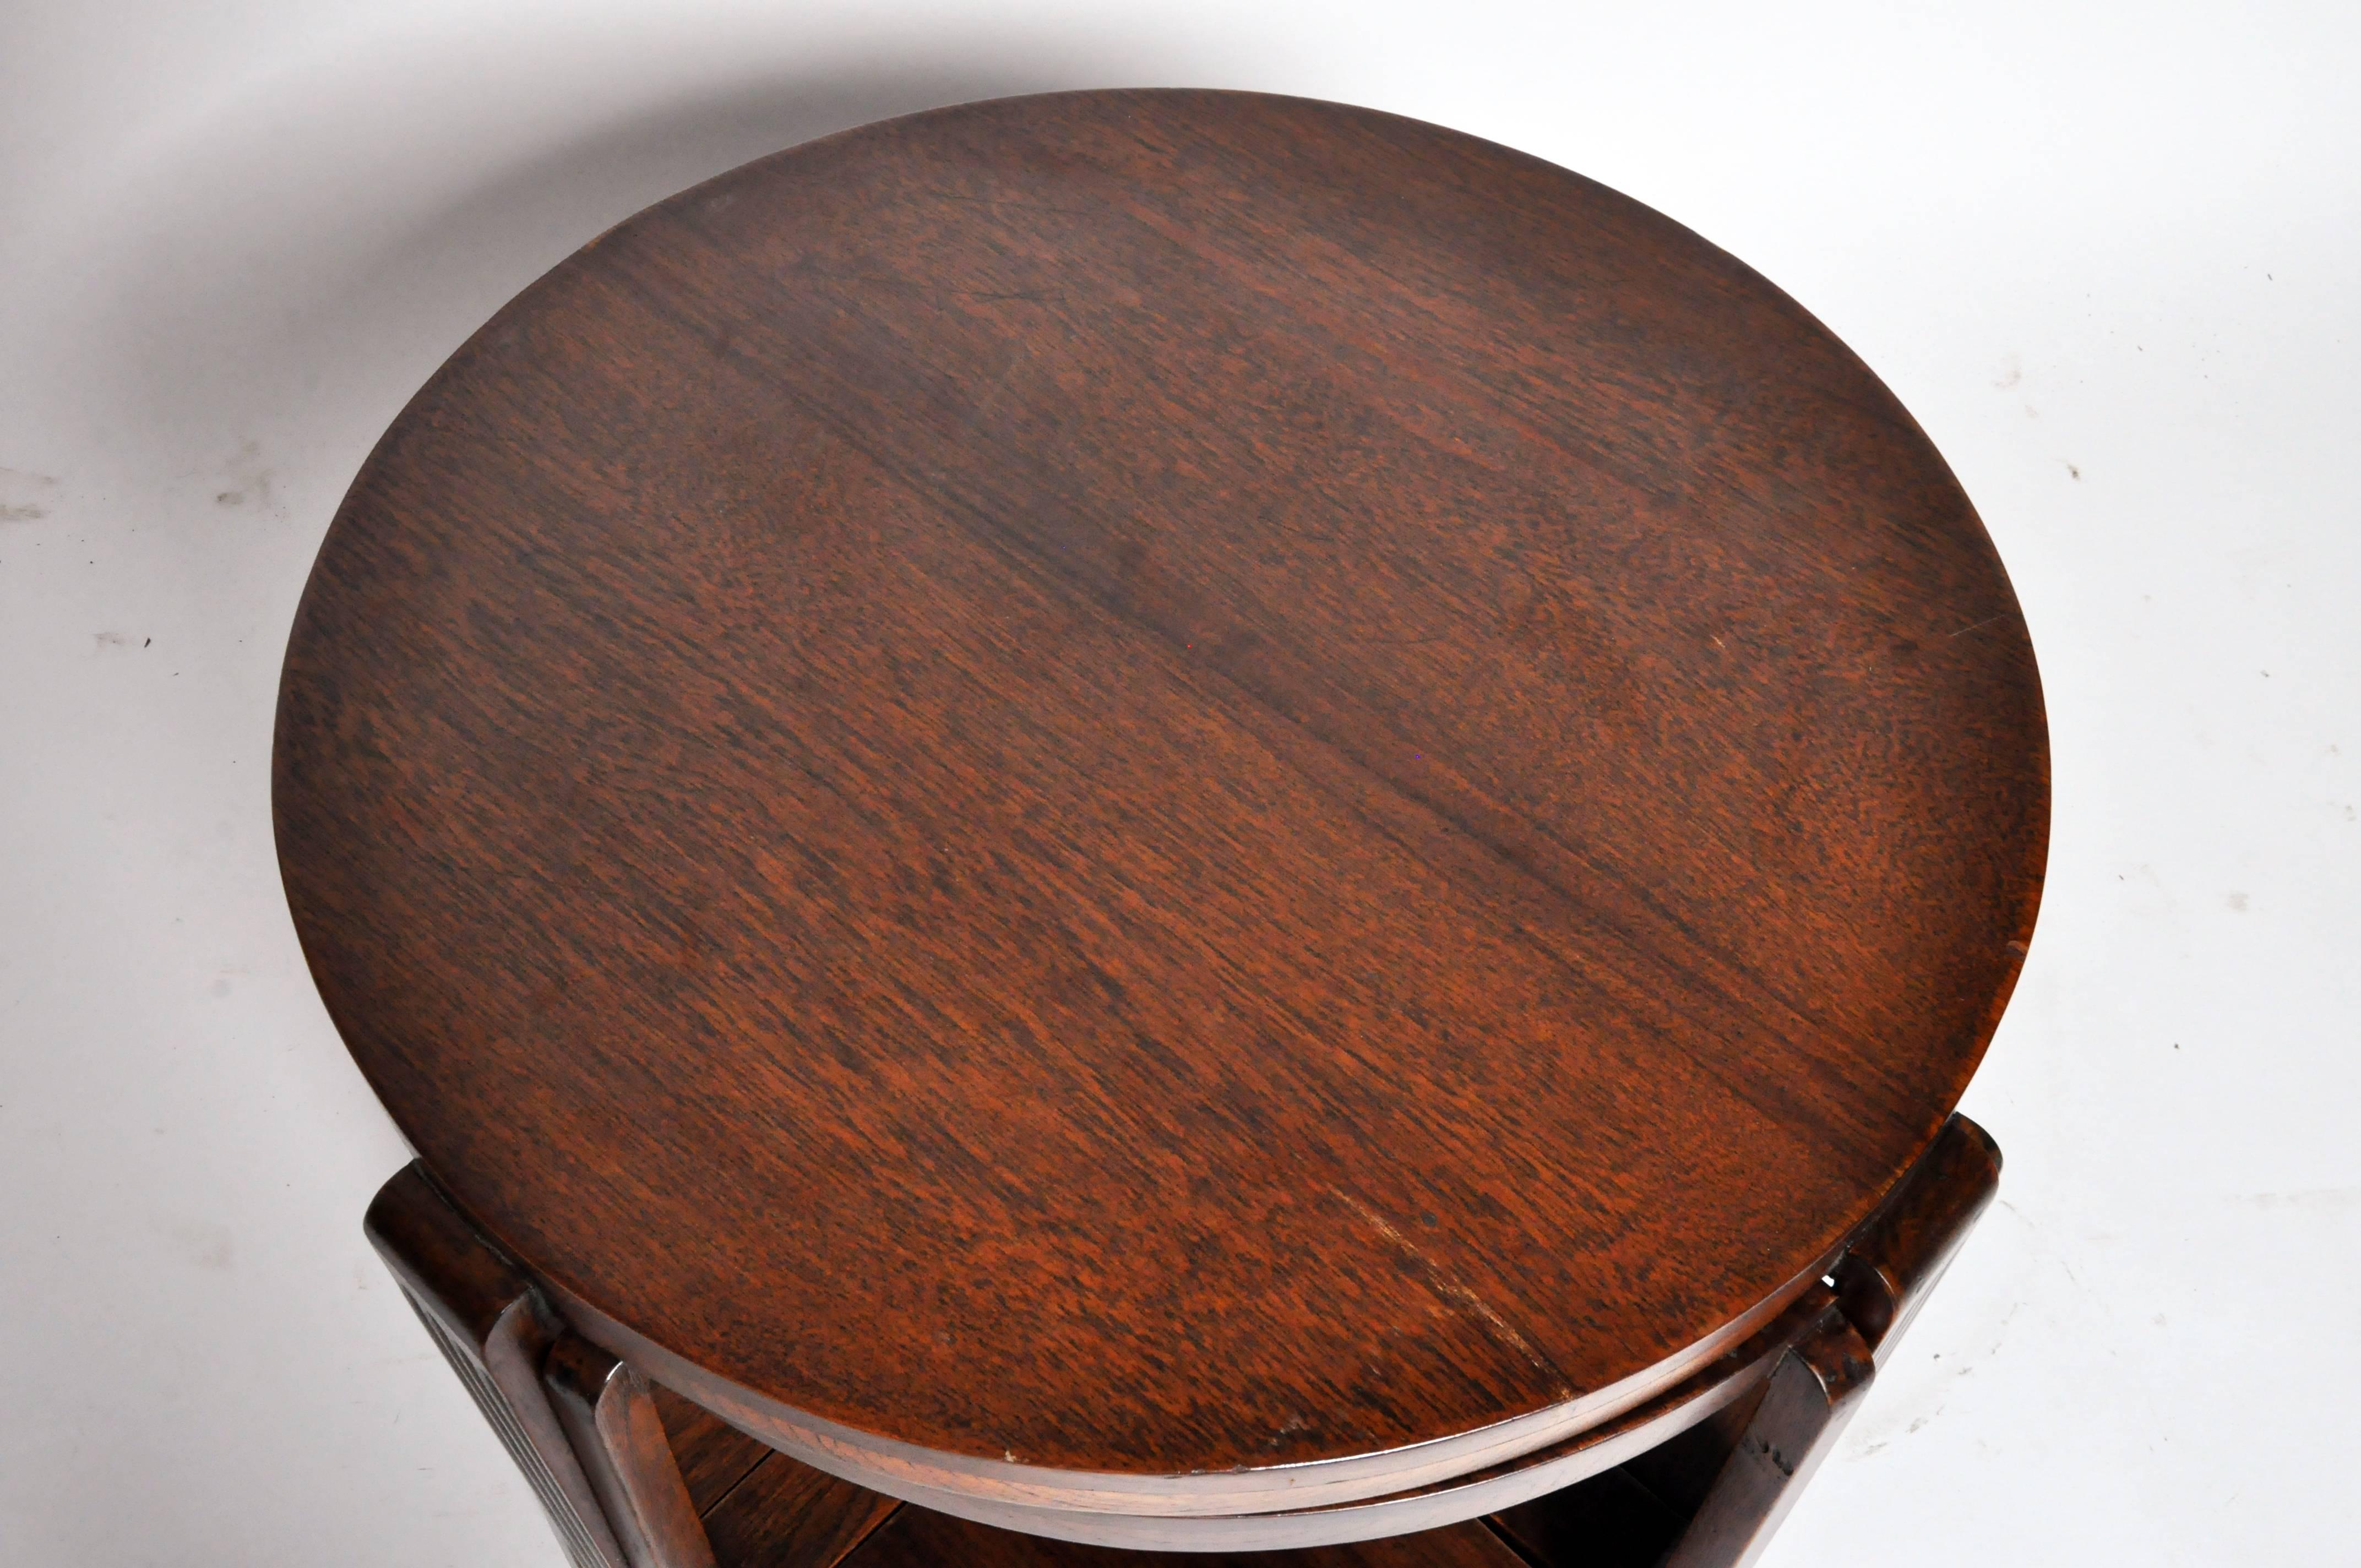 British Colonial Art Deco Round Coffee Table with Four Nesting Tables